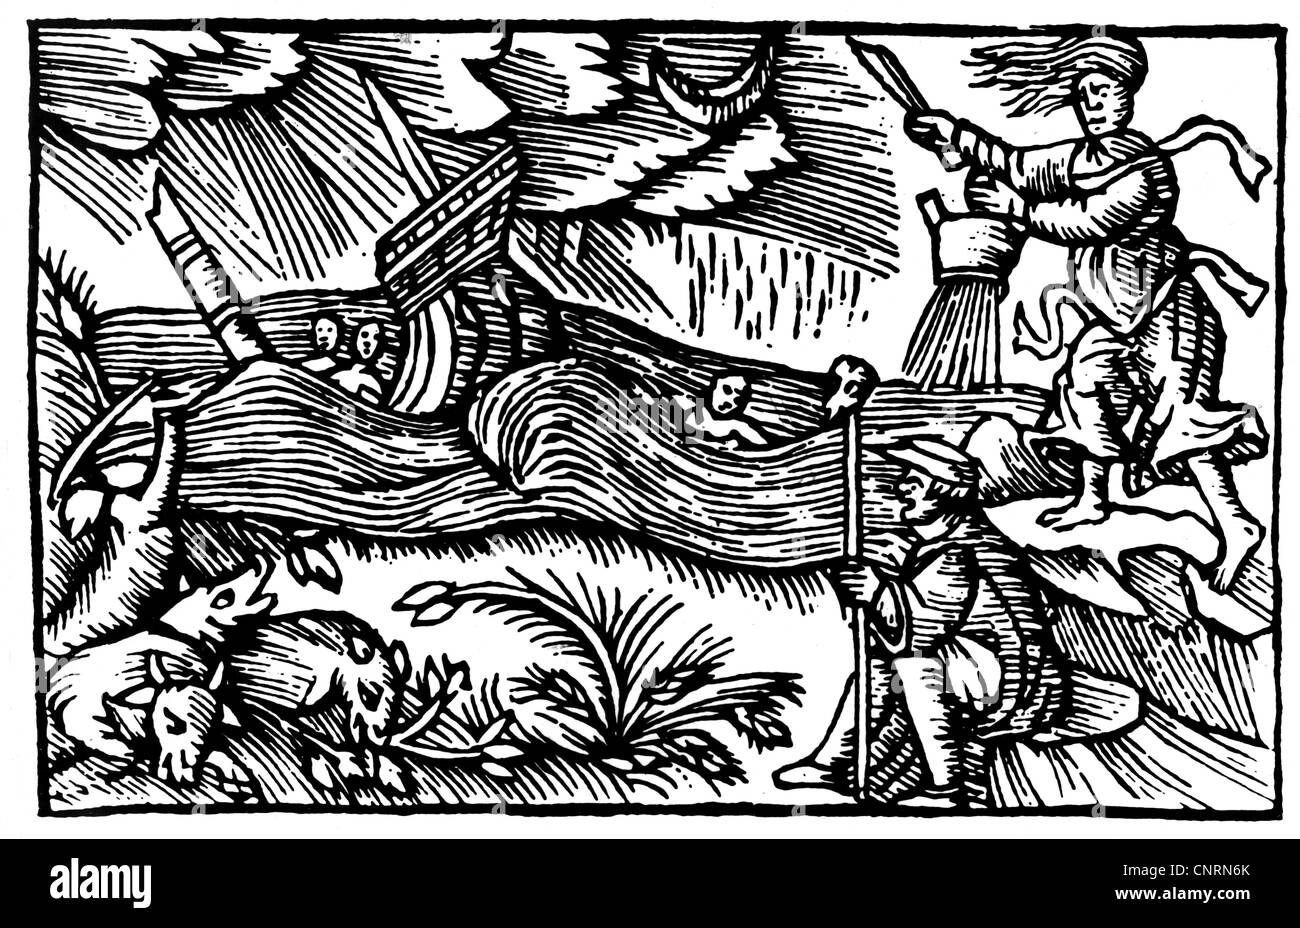 witches, witches brewing a storm, woodcut, 'Historia de Gentibus Septentrionalibus' of Olaus Magnus, Rome, 1555, Additional-Rights-Clearences-Not Available Stock Photo